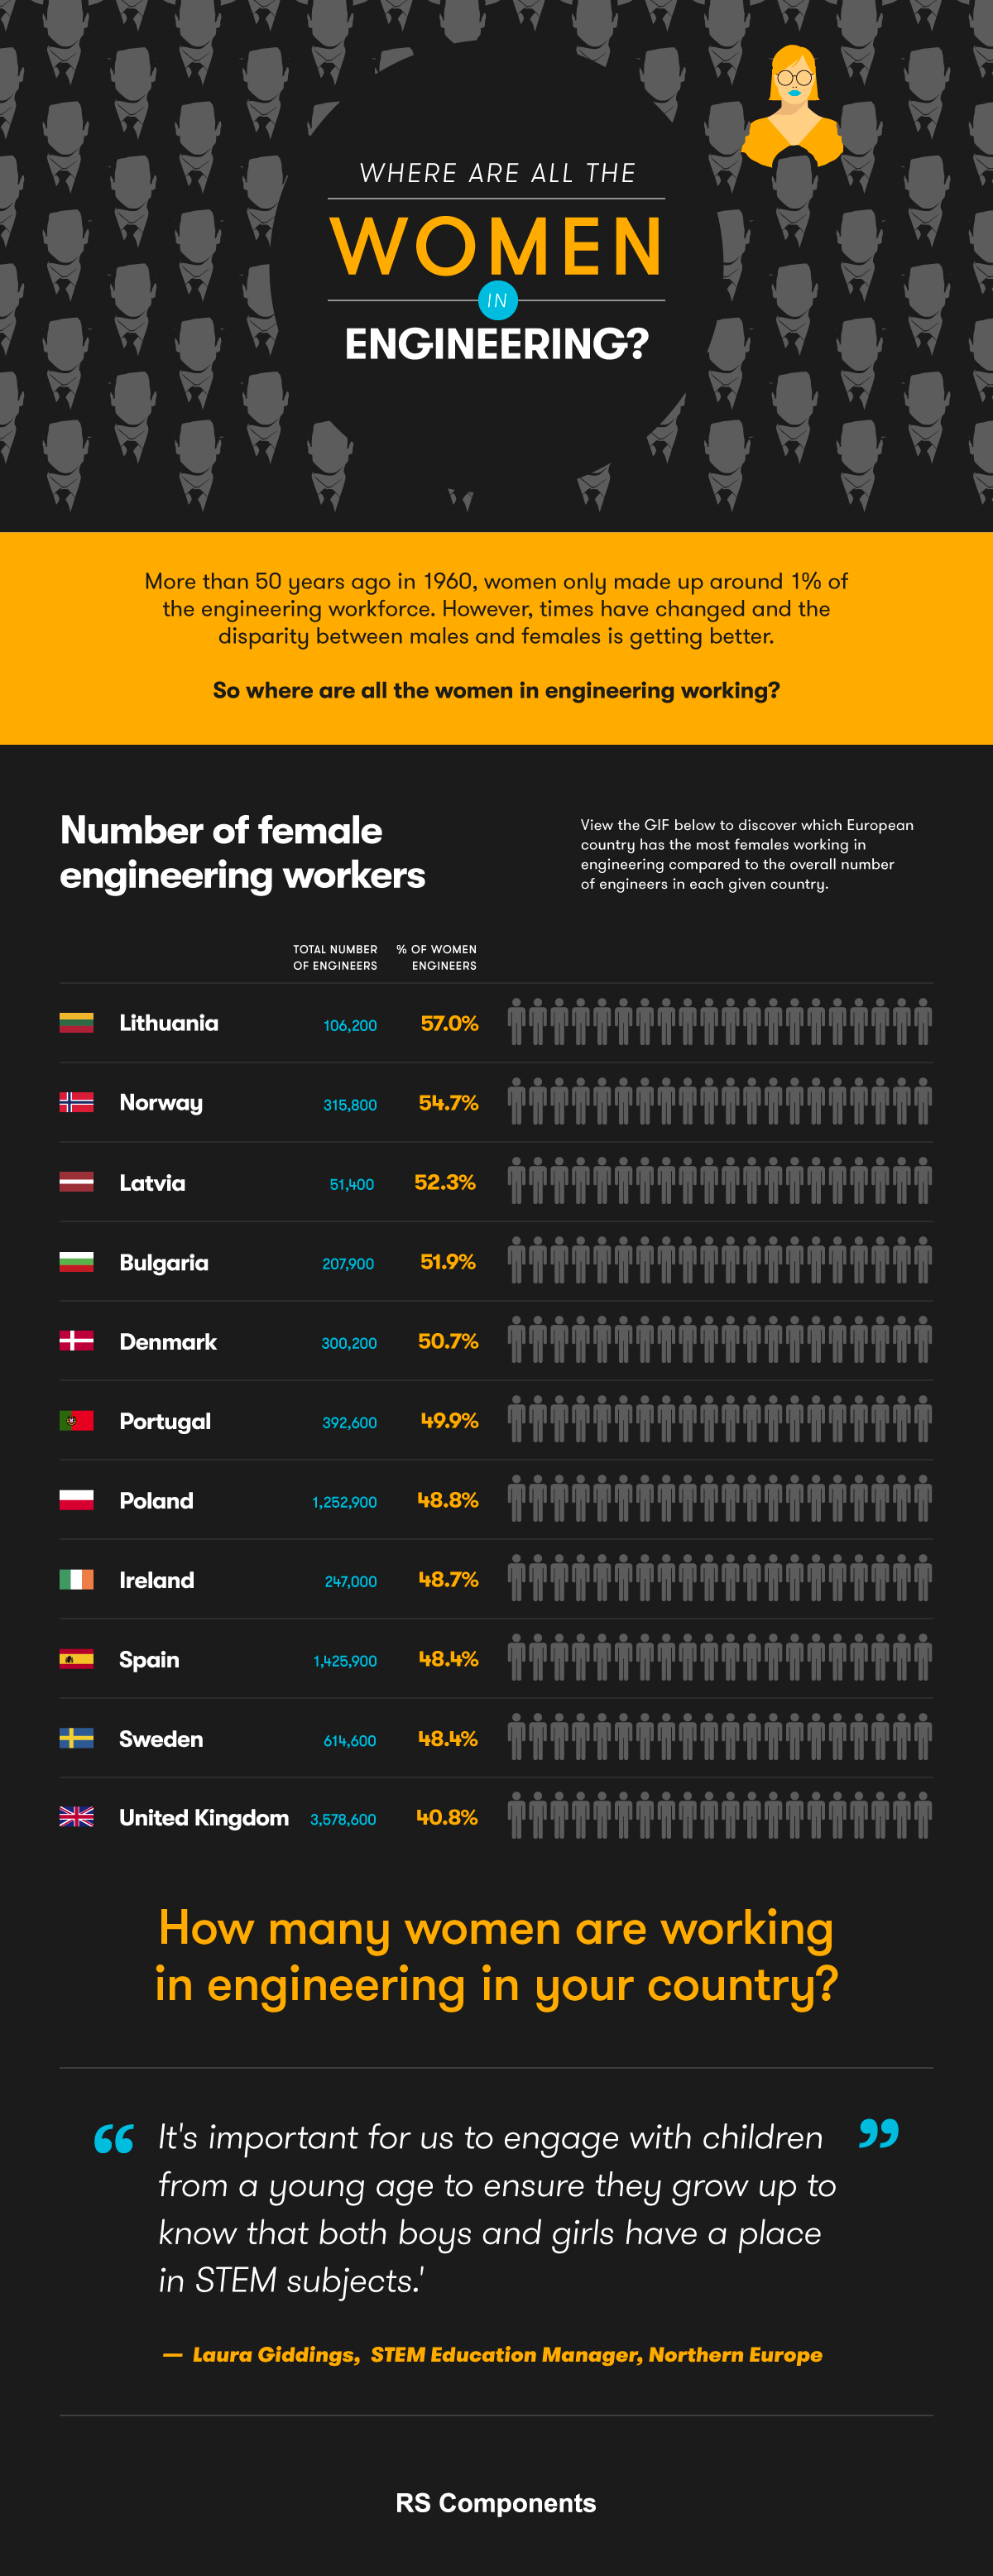 Were are all the women in Engineering by country